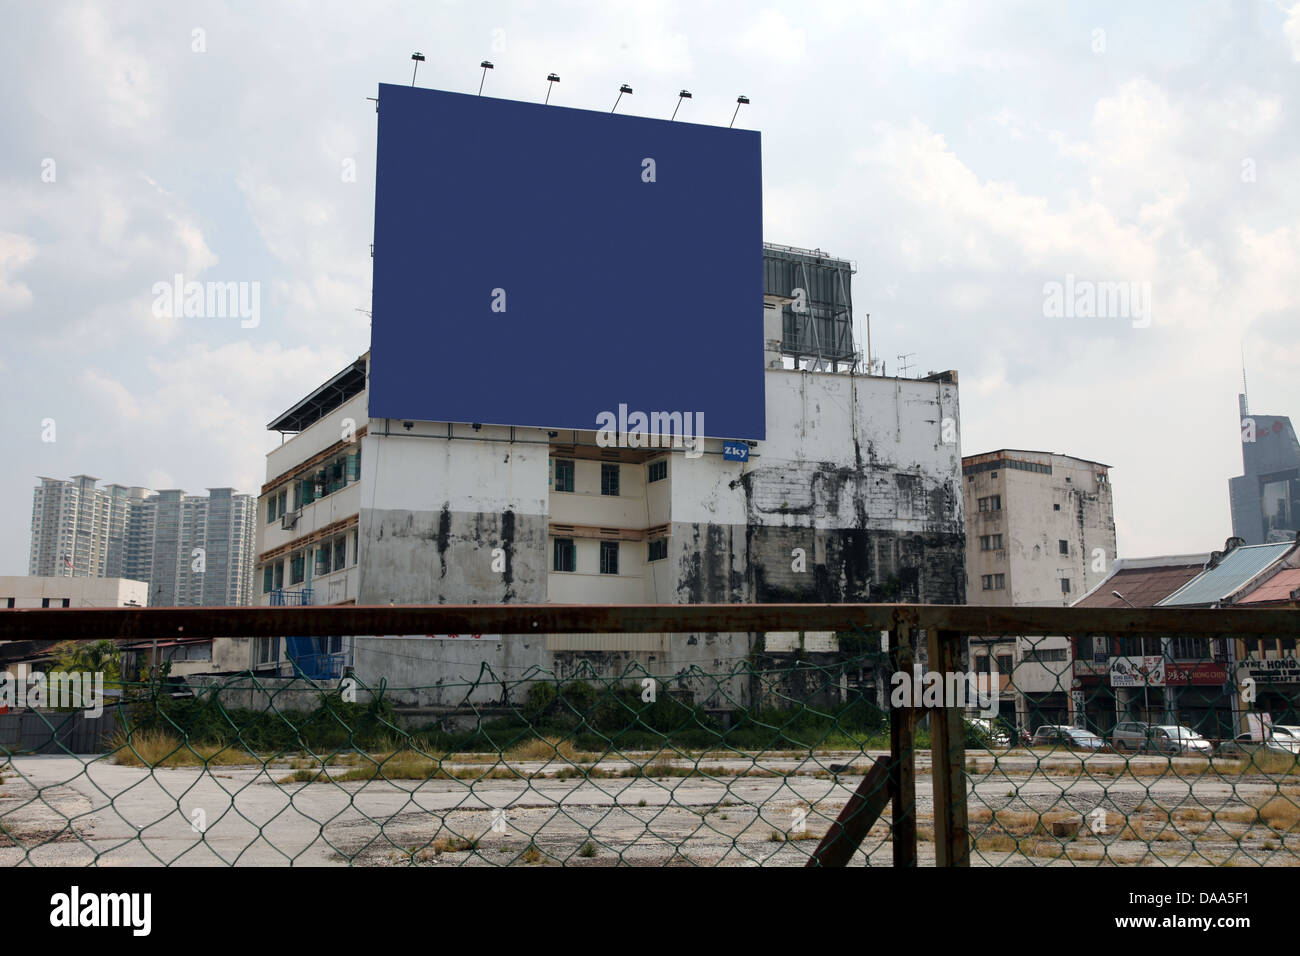 It's a photo of a wasteland or no man's land in the middle of a city in Malaysia. We can a see a big empty outdoor poster Stock Photo